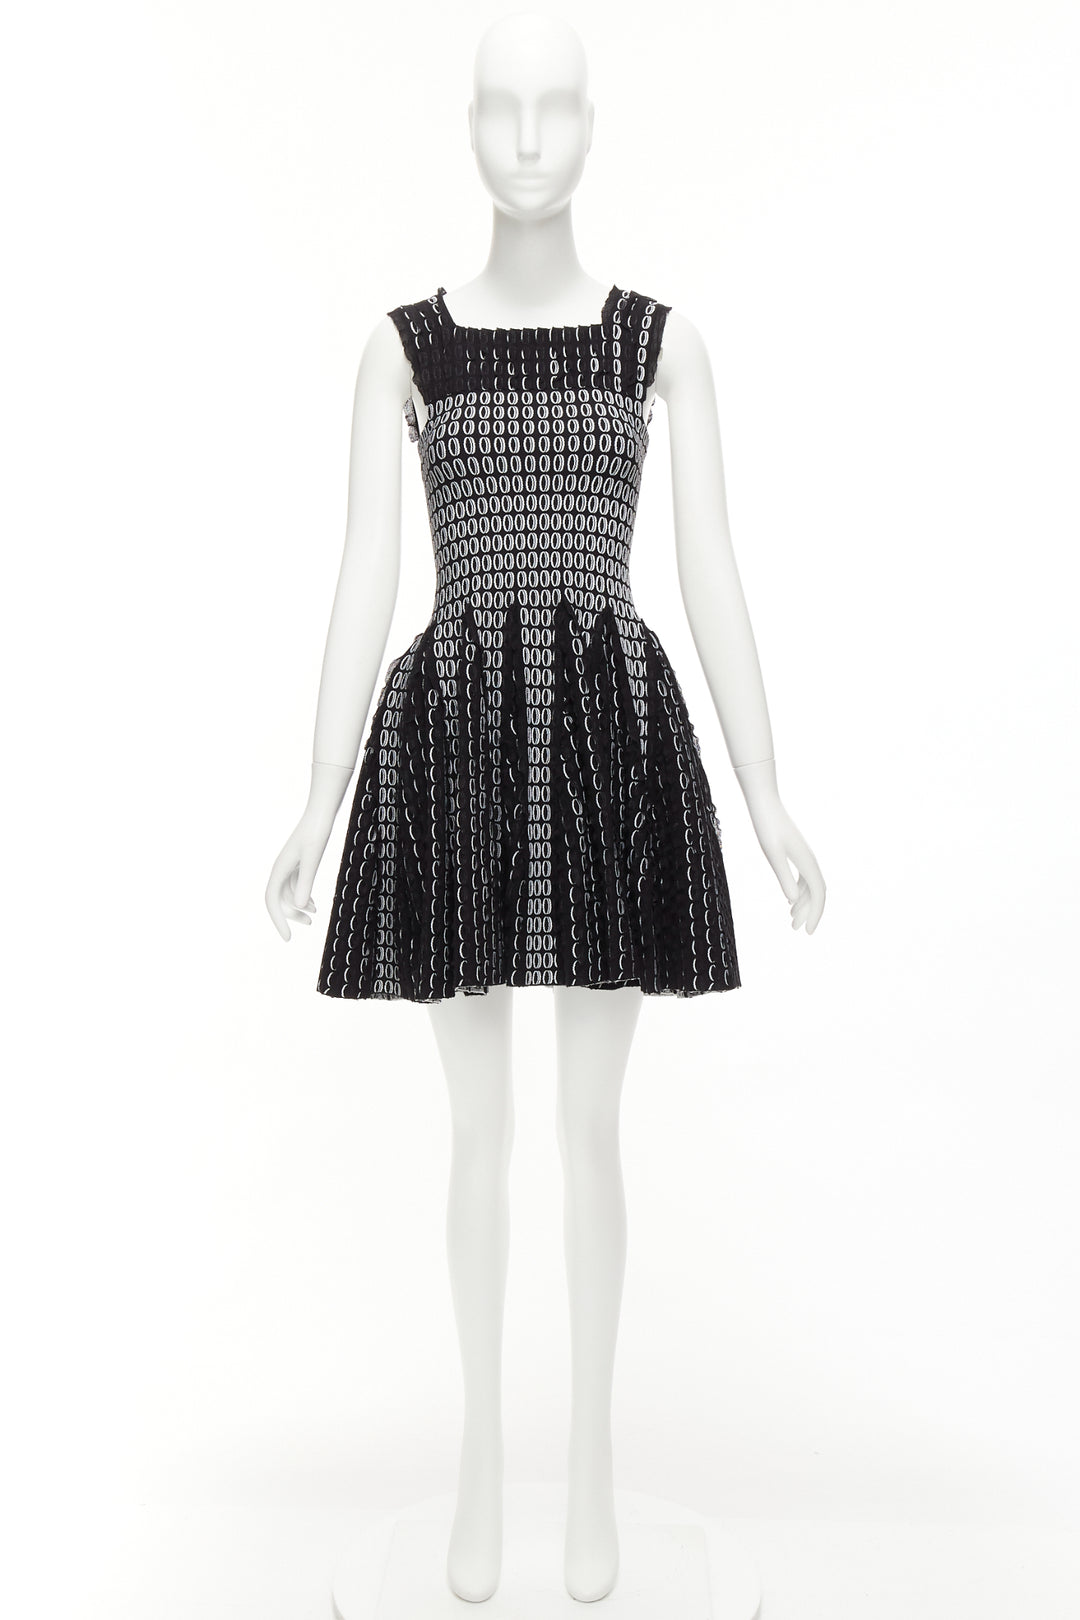 ALAIA black white scallop ruffle eyelet jacquard knitted fit flare dress FR36 S